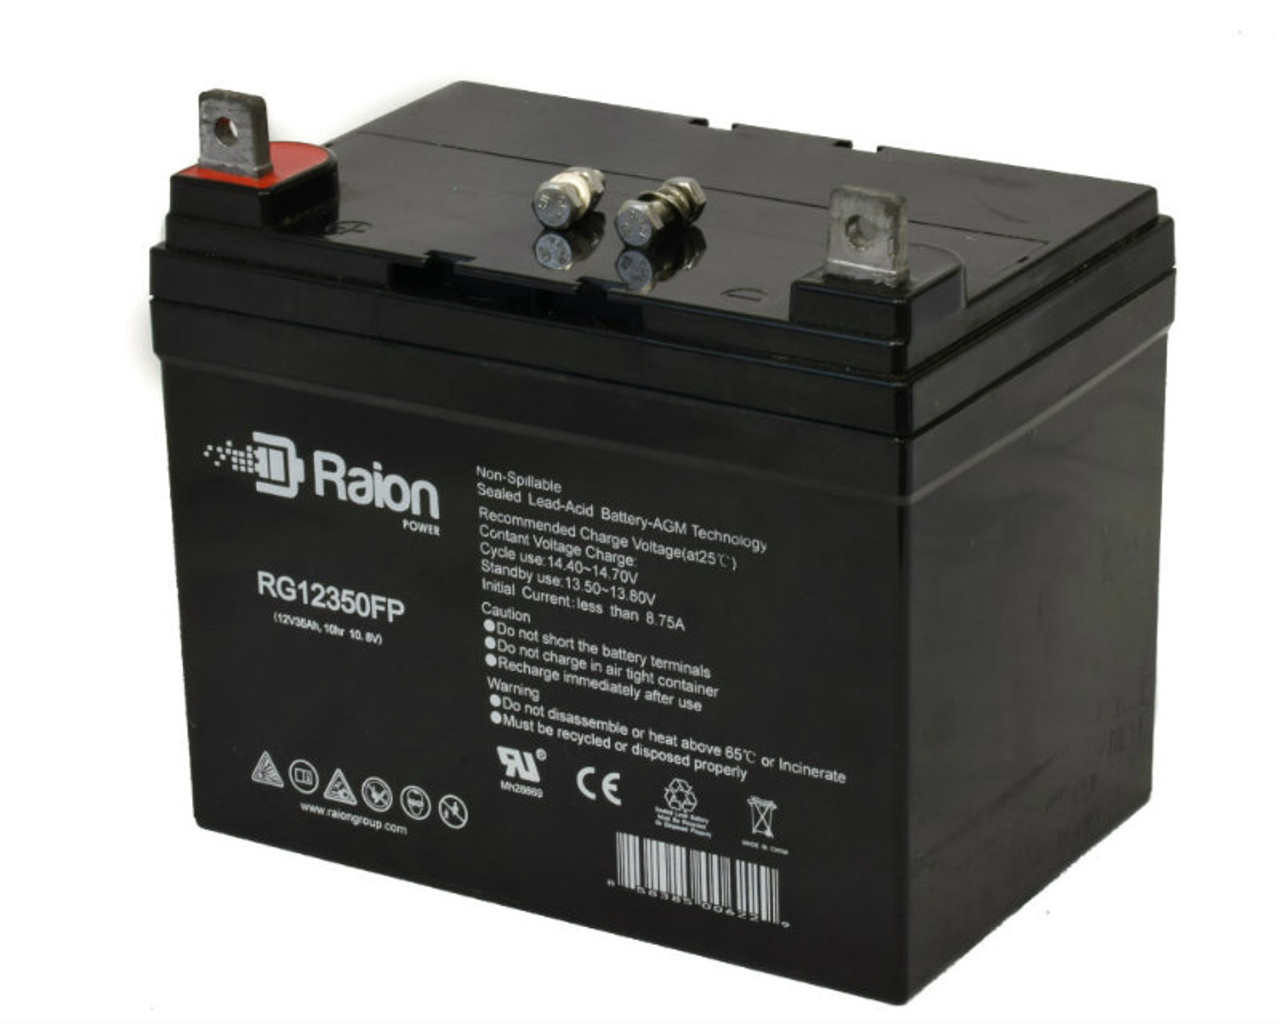 Raion Power Replacement 12V 35Ah RG12350FP Mobility Scooter Battery for Invacare Tri Scoot ll